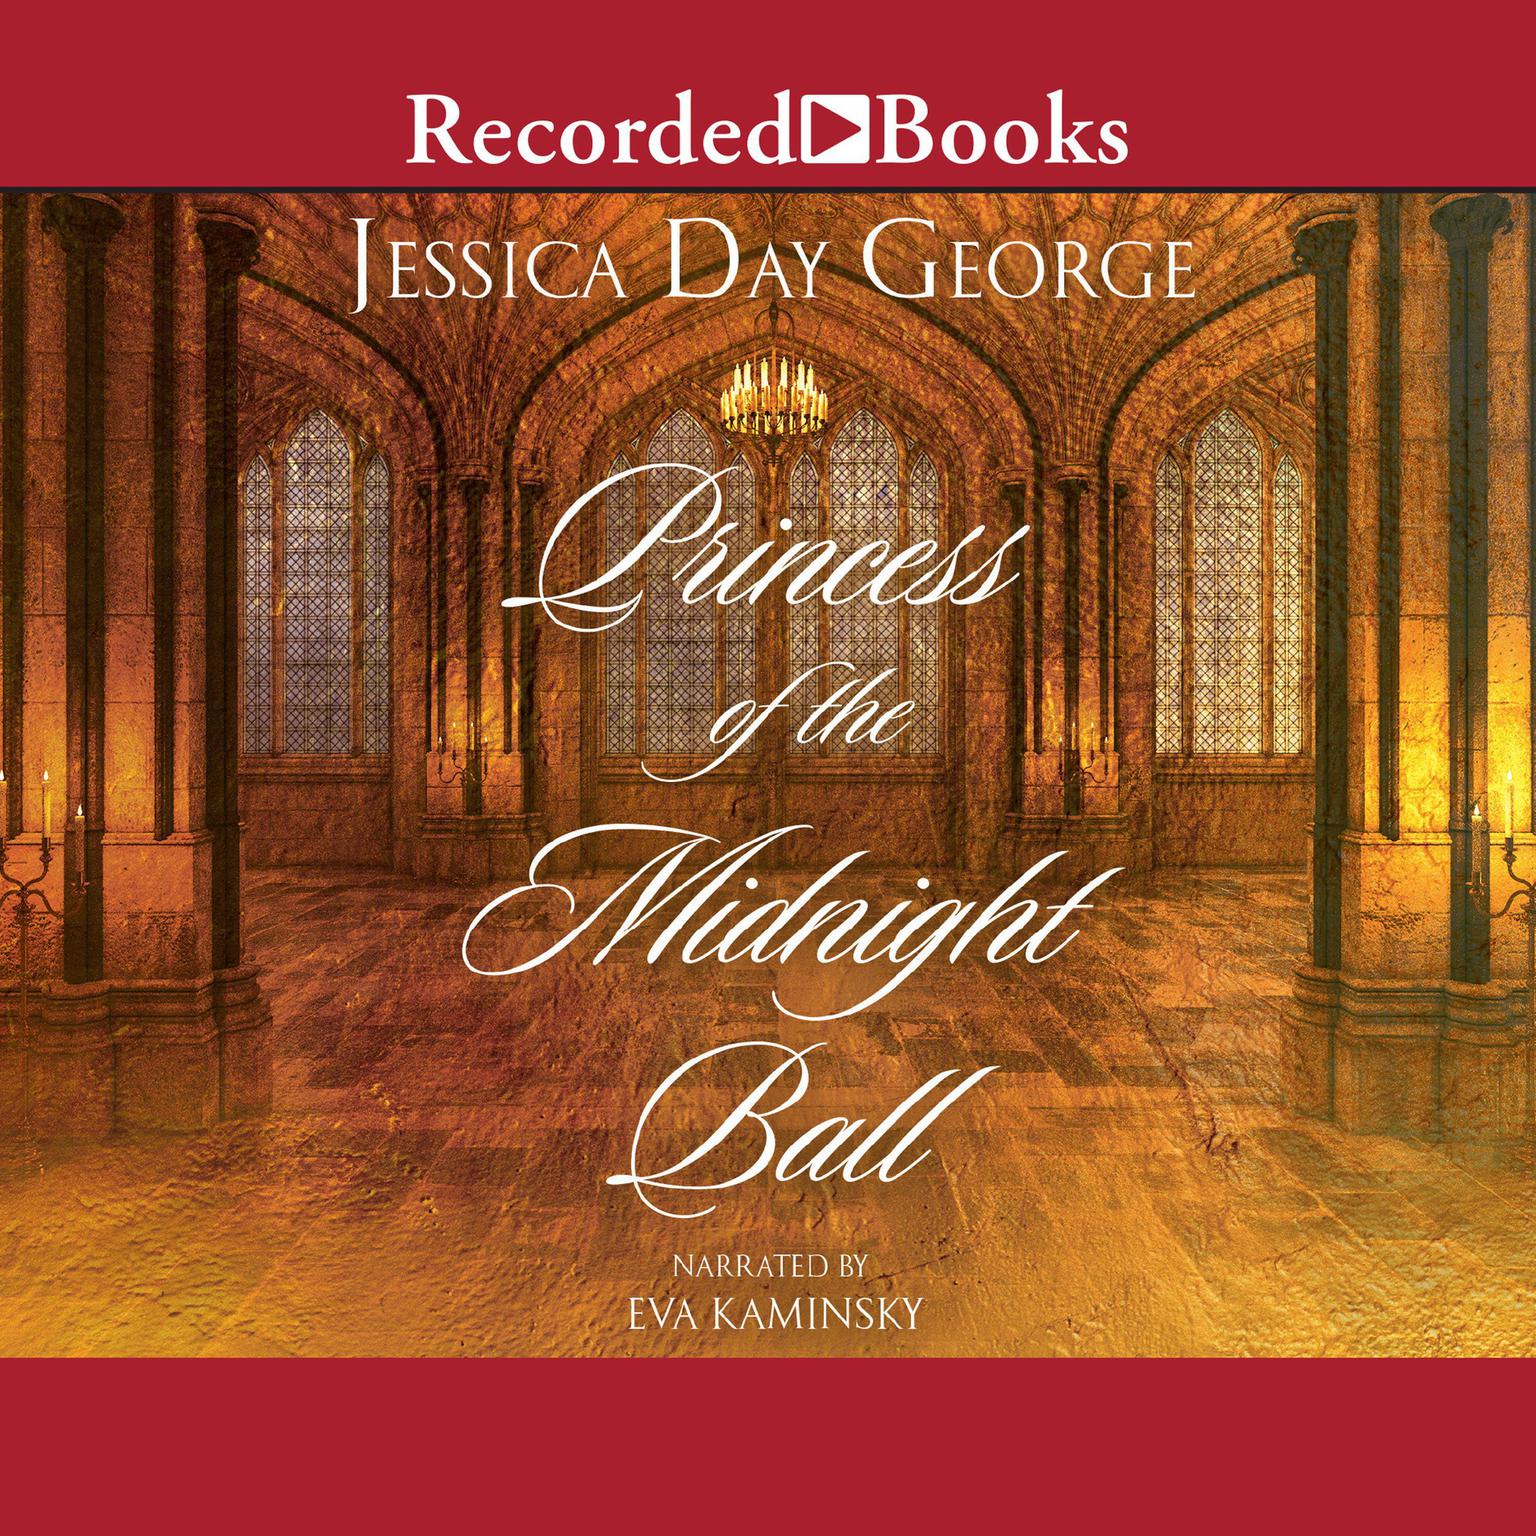 Princess of the Midnight Ball Audiobook, by Jessica Day George